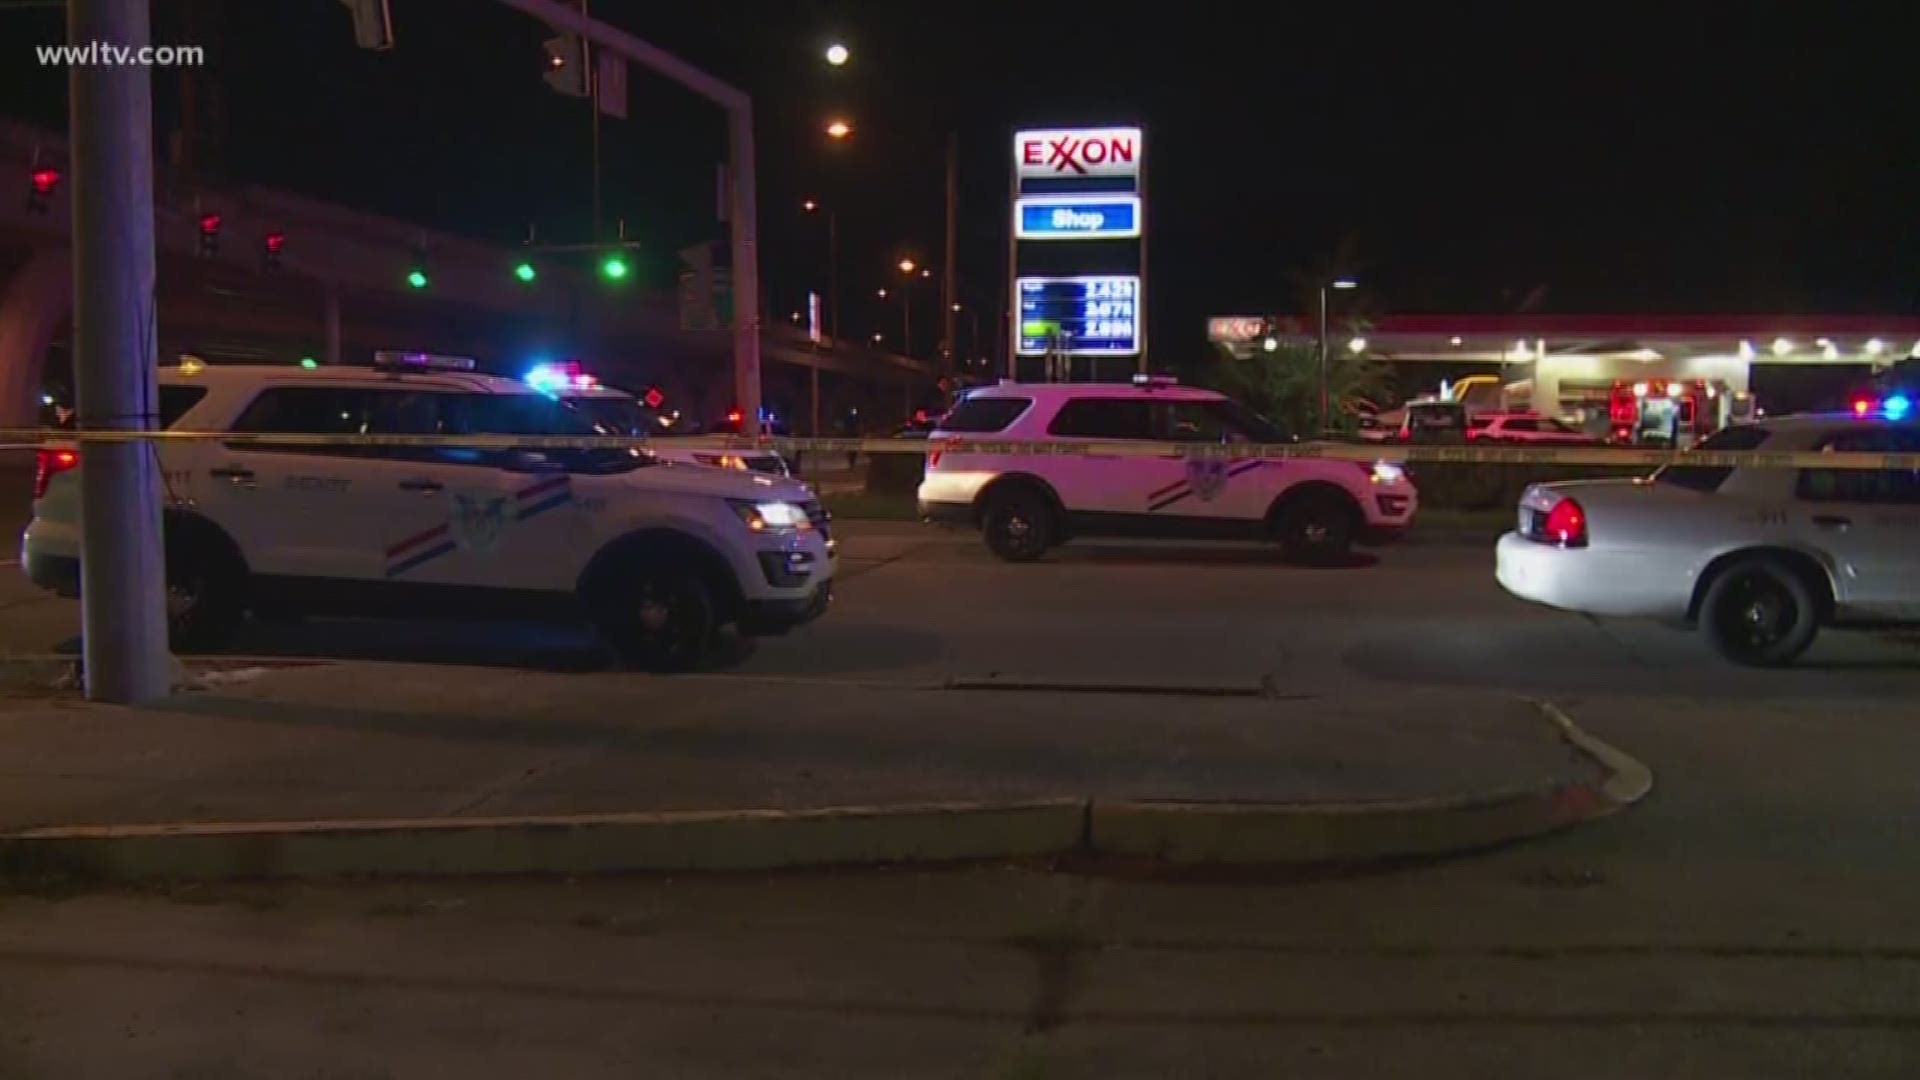 Officials say a suspect was shot near a gas station on the West Bank early Sunday morning.